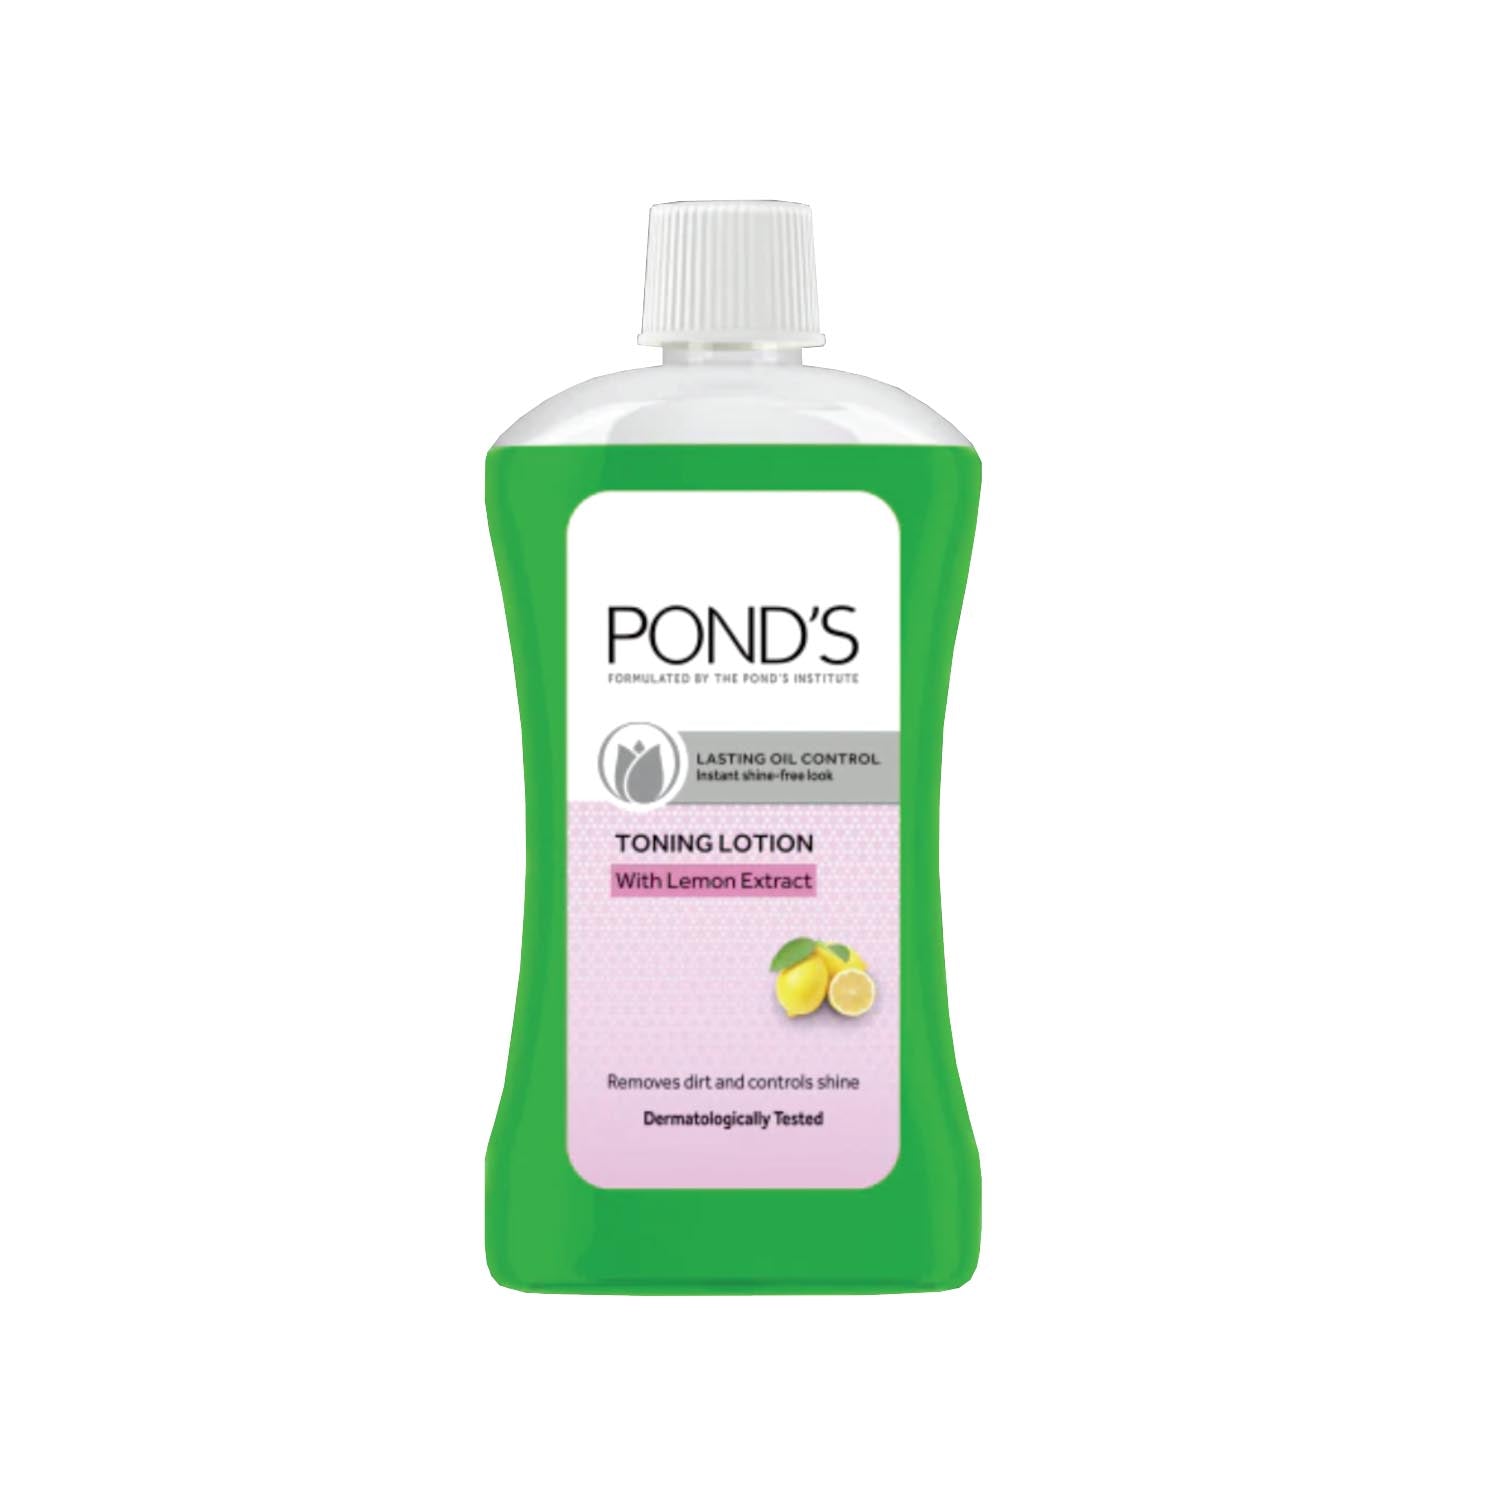 Pond's Lasting Oil Control Toning Lotion, 125ml